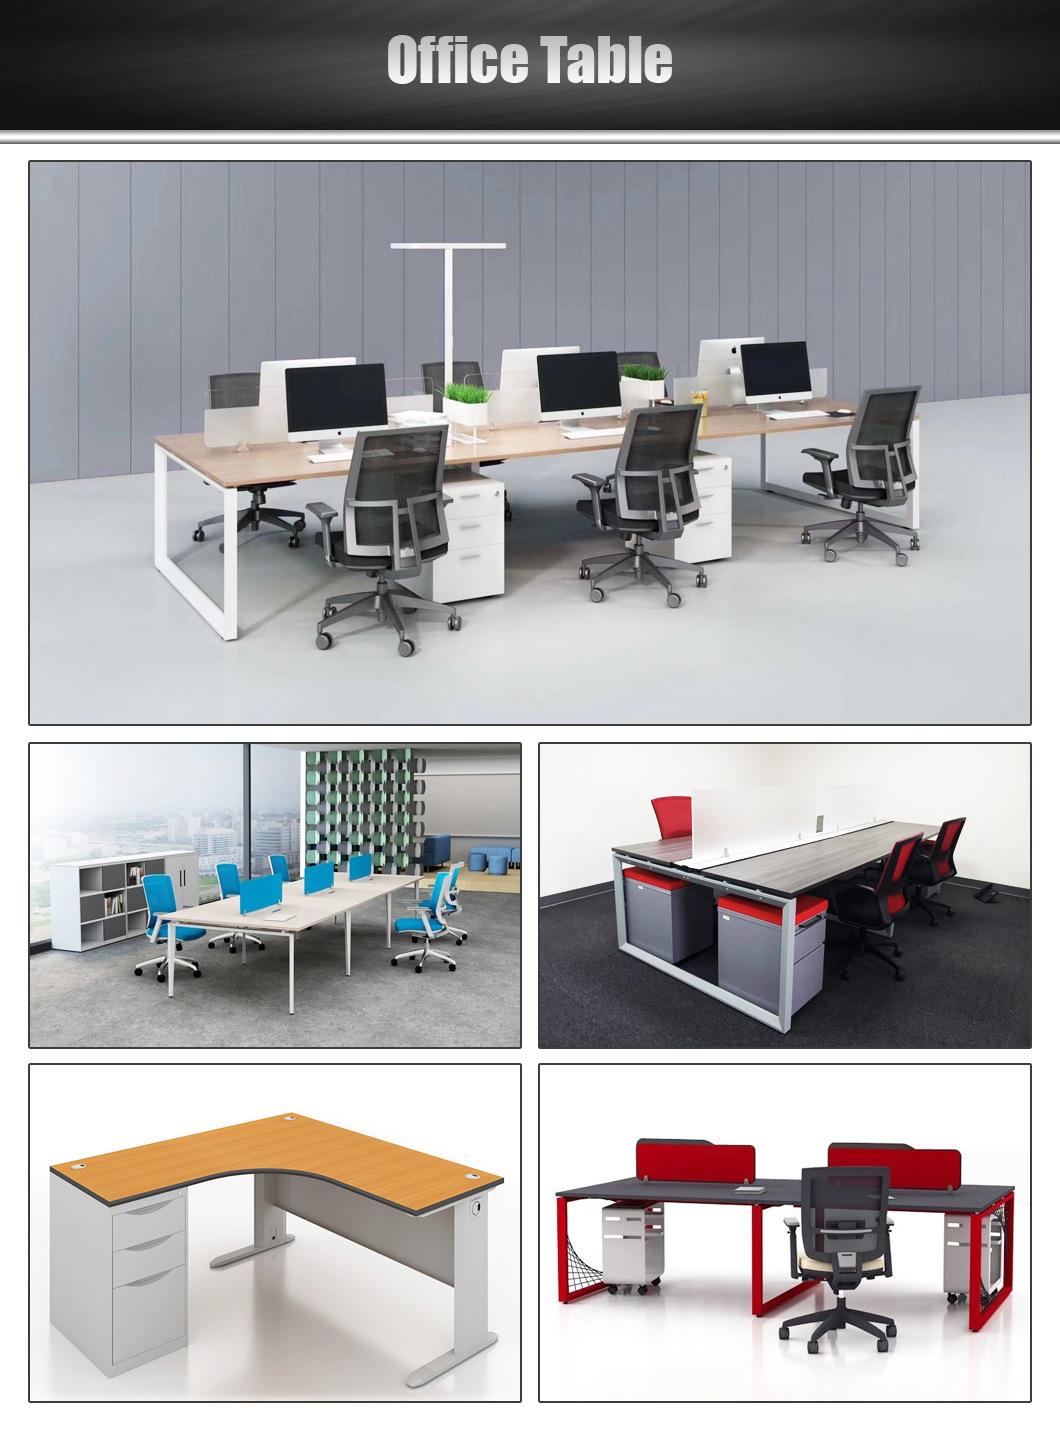 Storage Cabinet Office Furniture with Fully Knock Down Structure